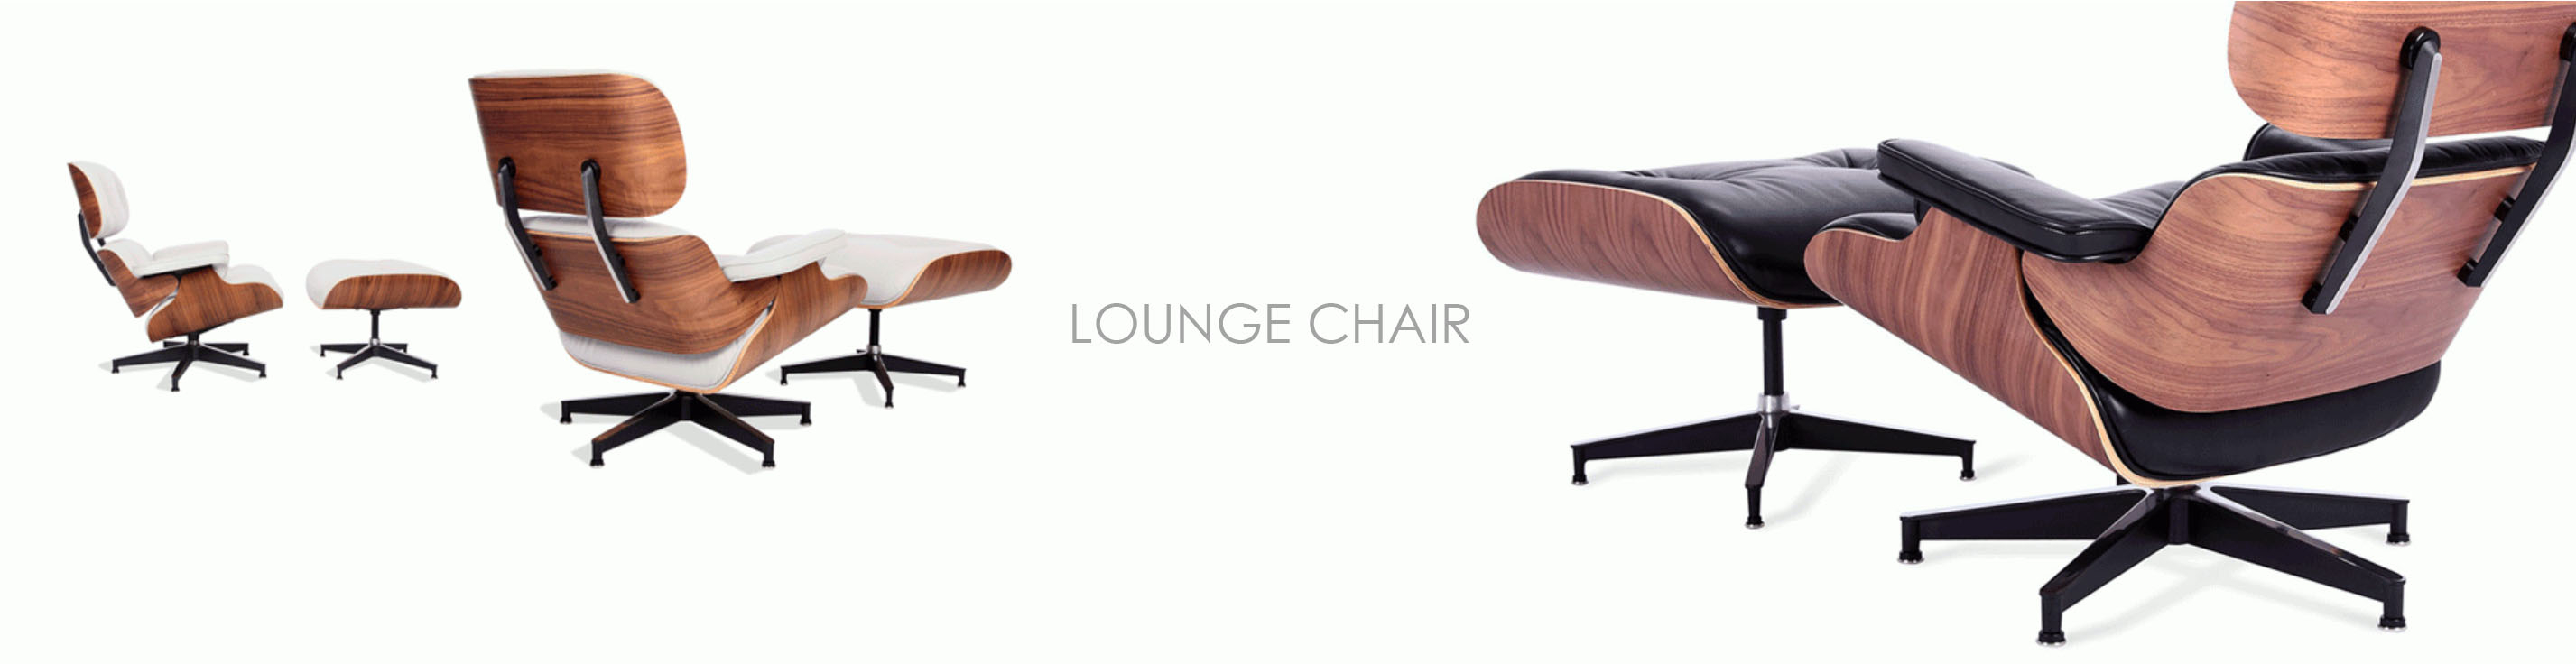 Buy Lounge Chairs Hong Kong | Stockroom Furniture HK Outlet